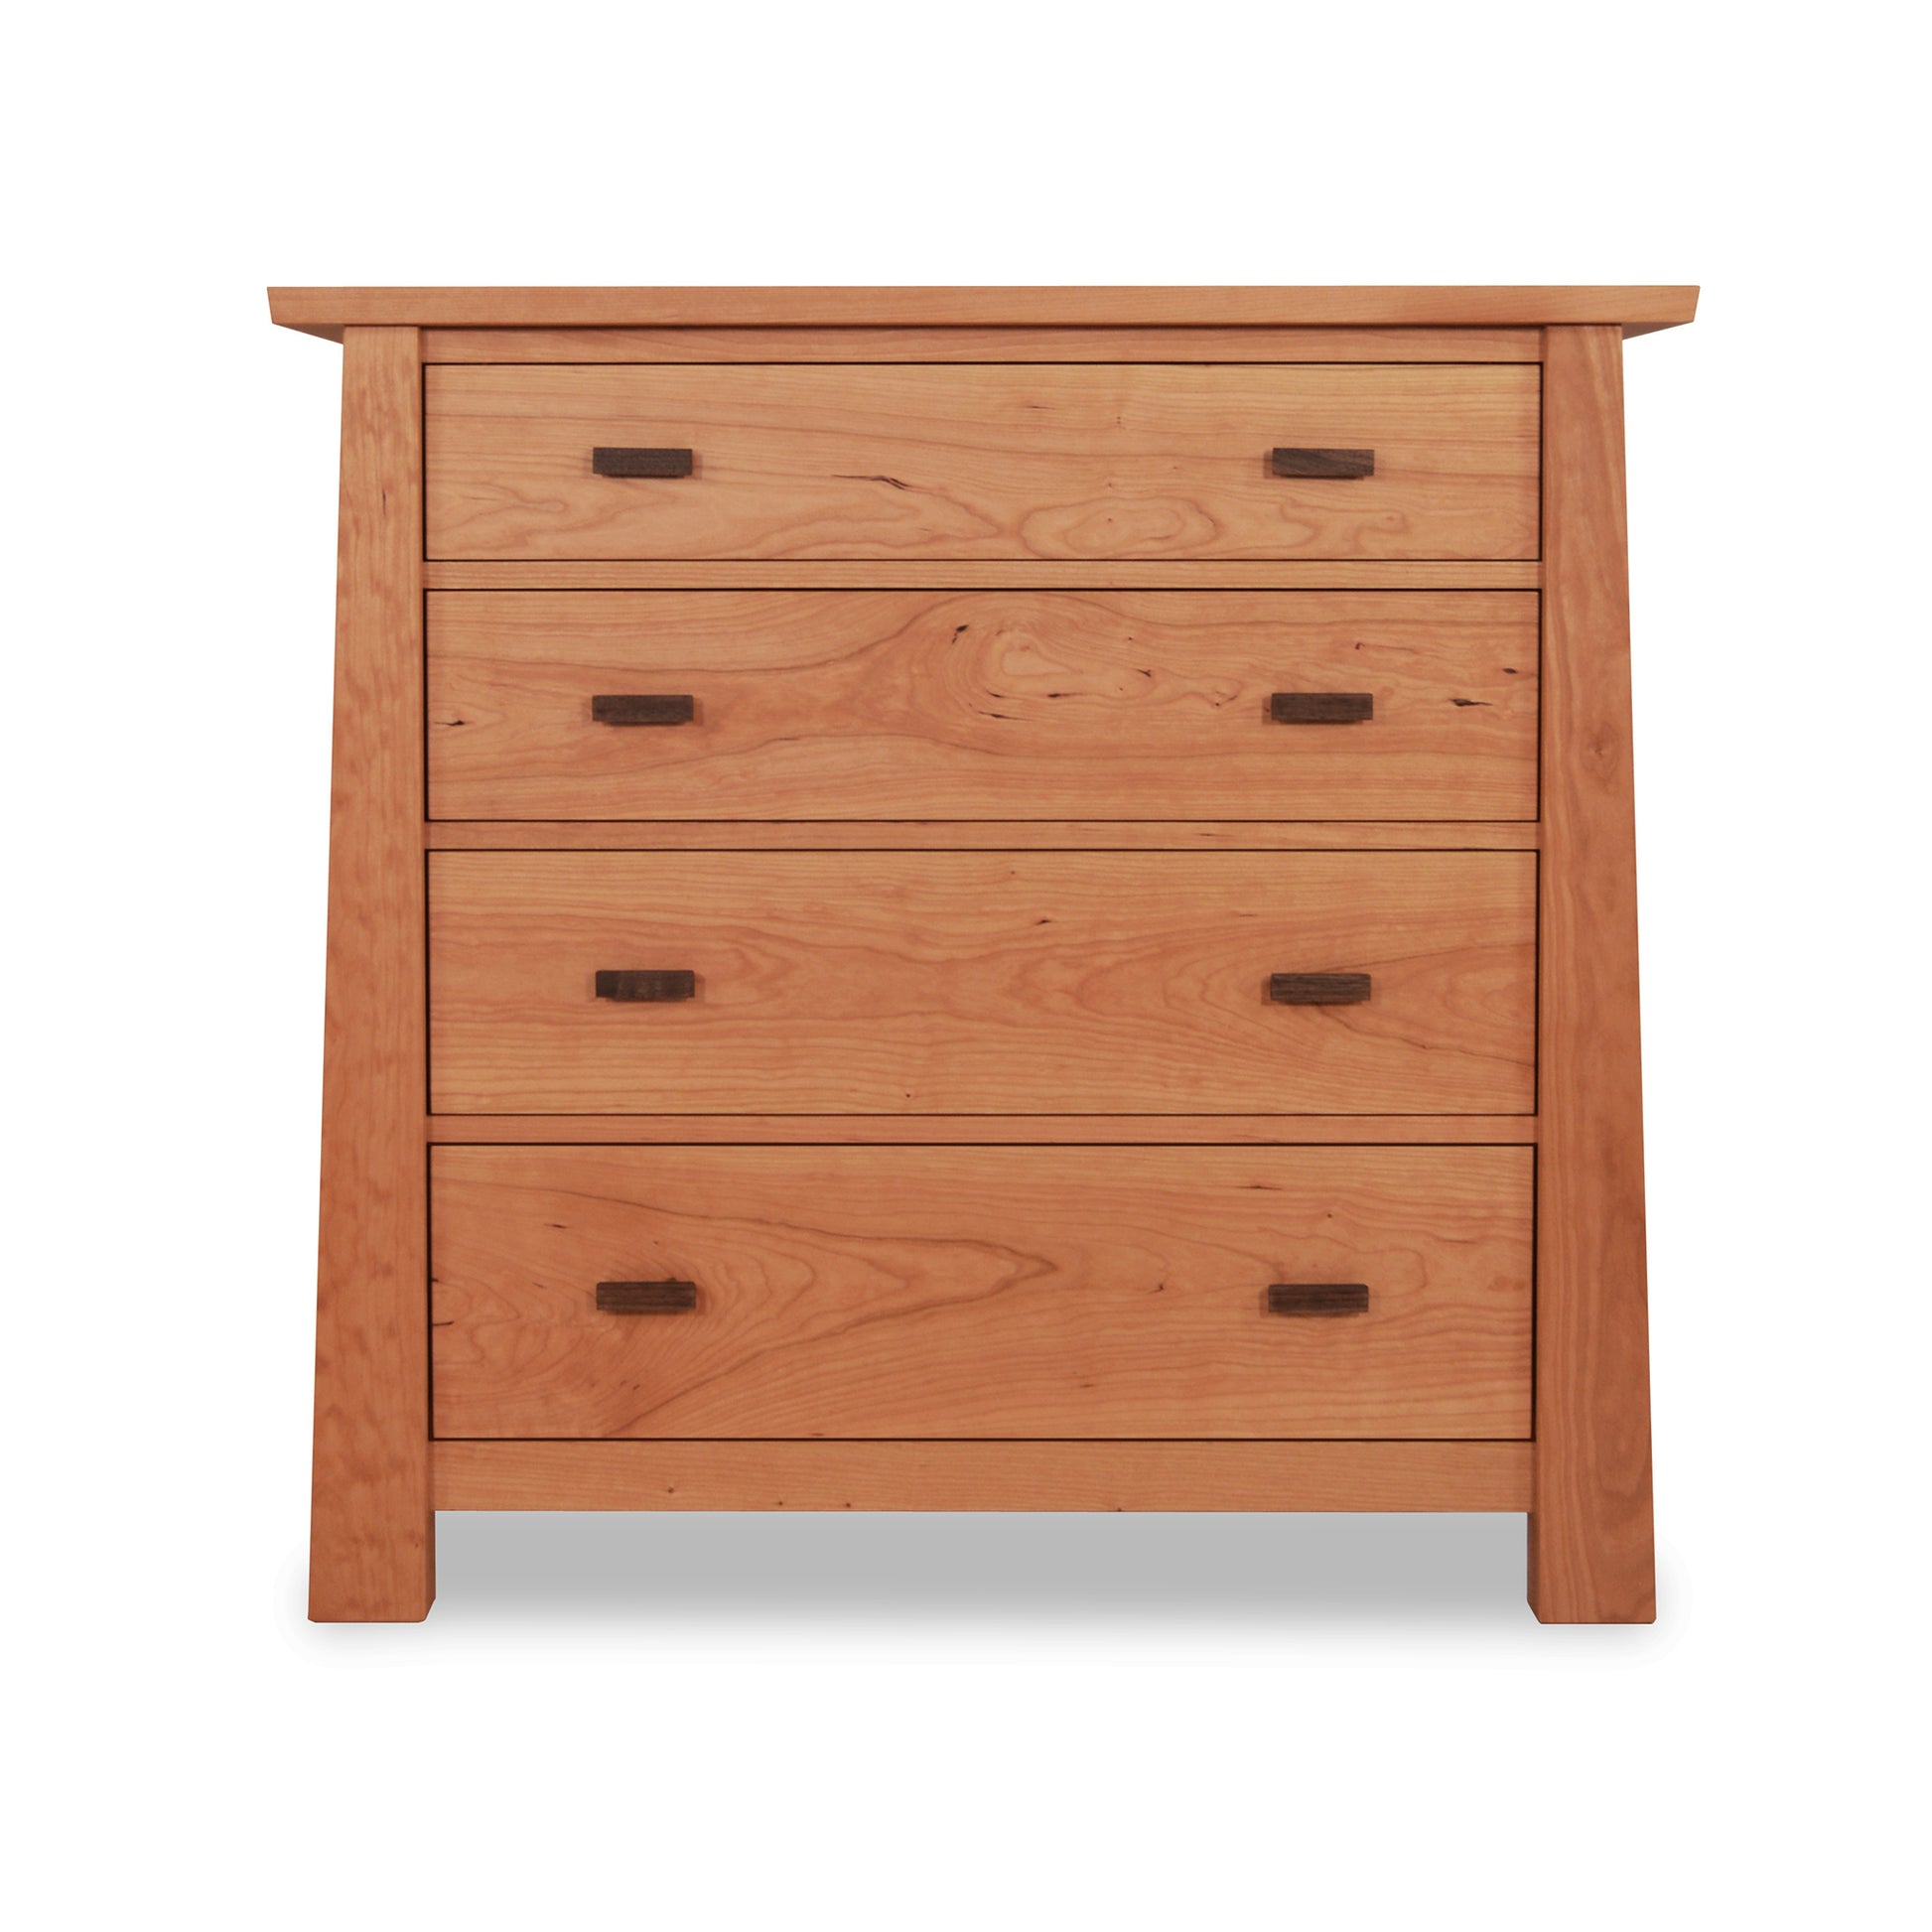 A Gamble 4-Drawer Chest from Maple Corner Woodworks with a traditional craftsman style on a white background.